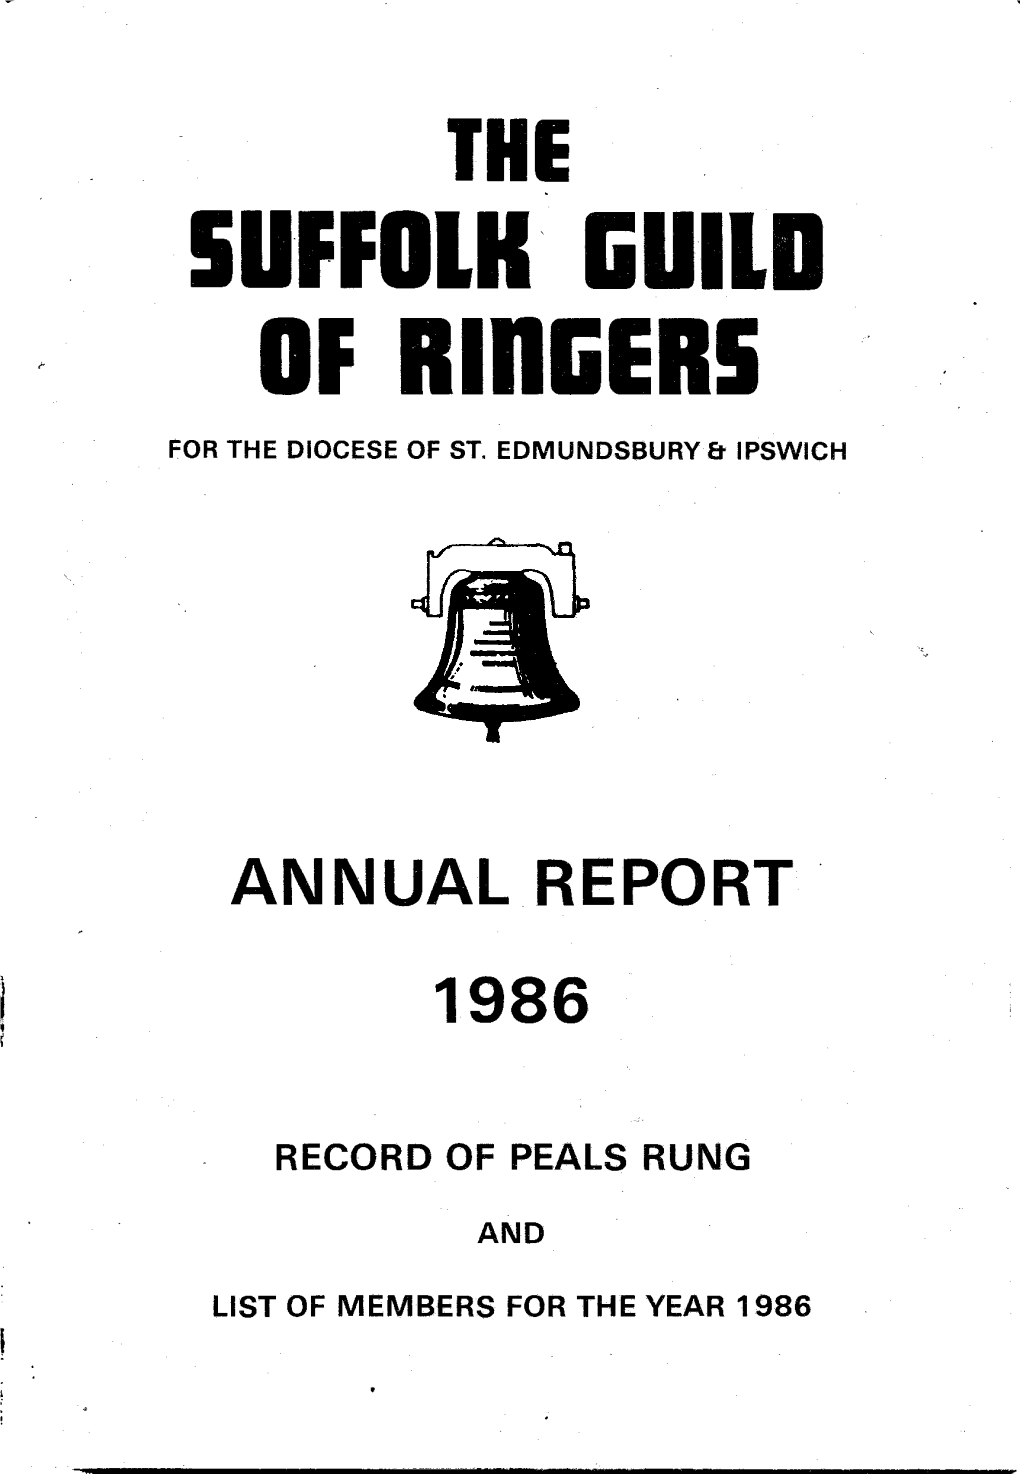 SUFFOLK GUILD of Rincers